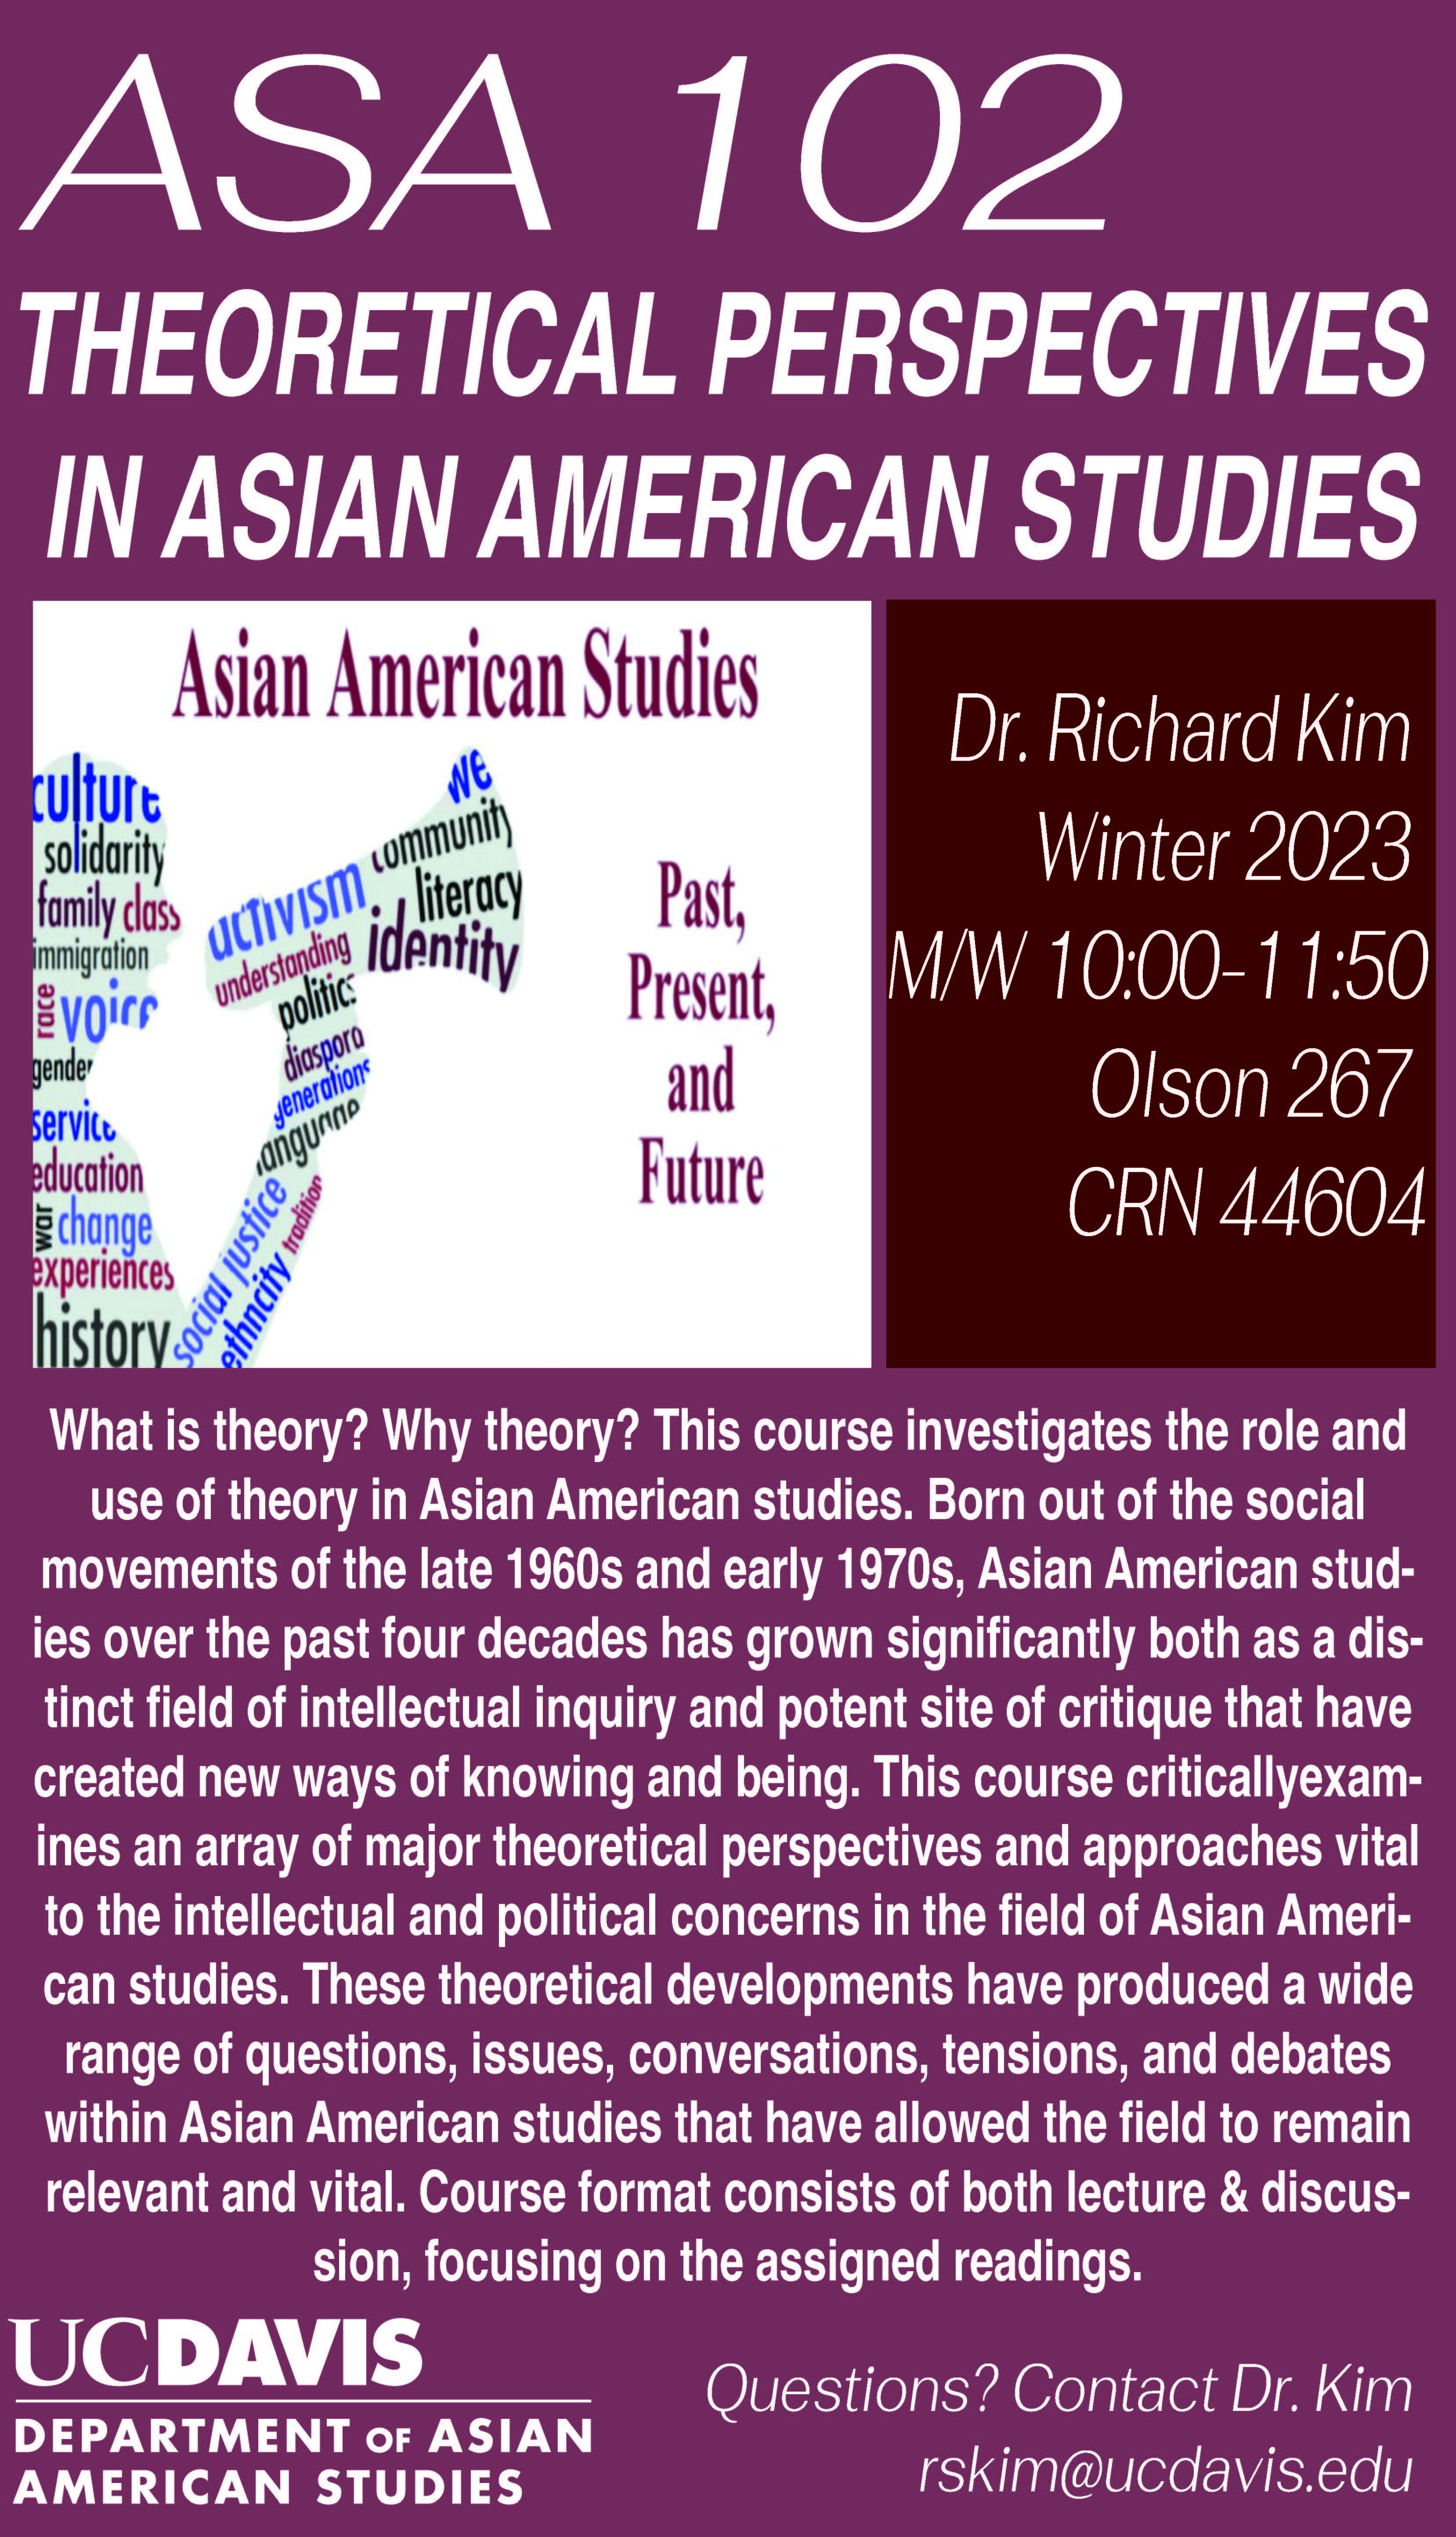 ASA 102 Theoretical Perspective in Asian American Studies course flyer for Winter 2023